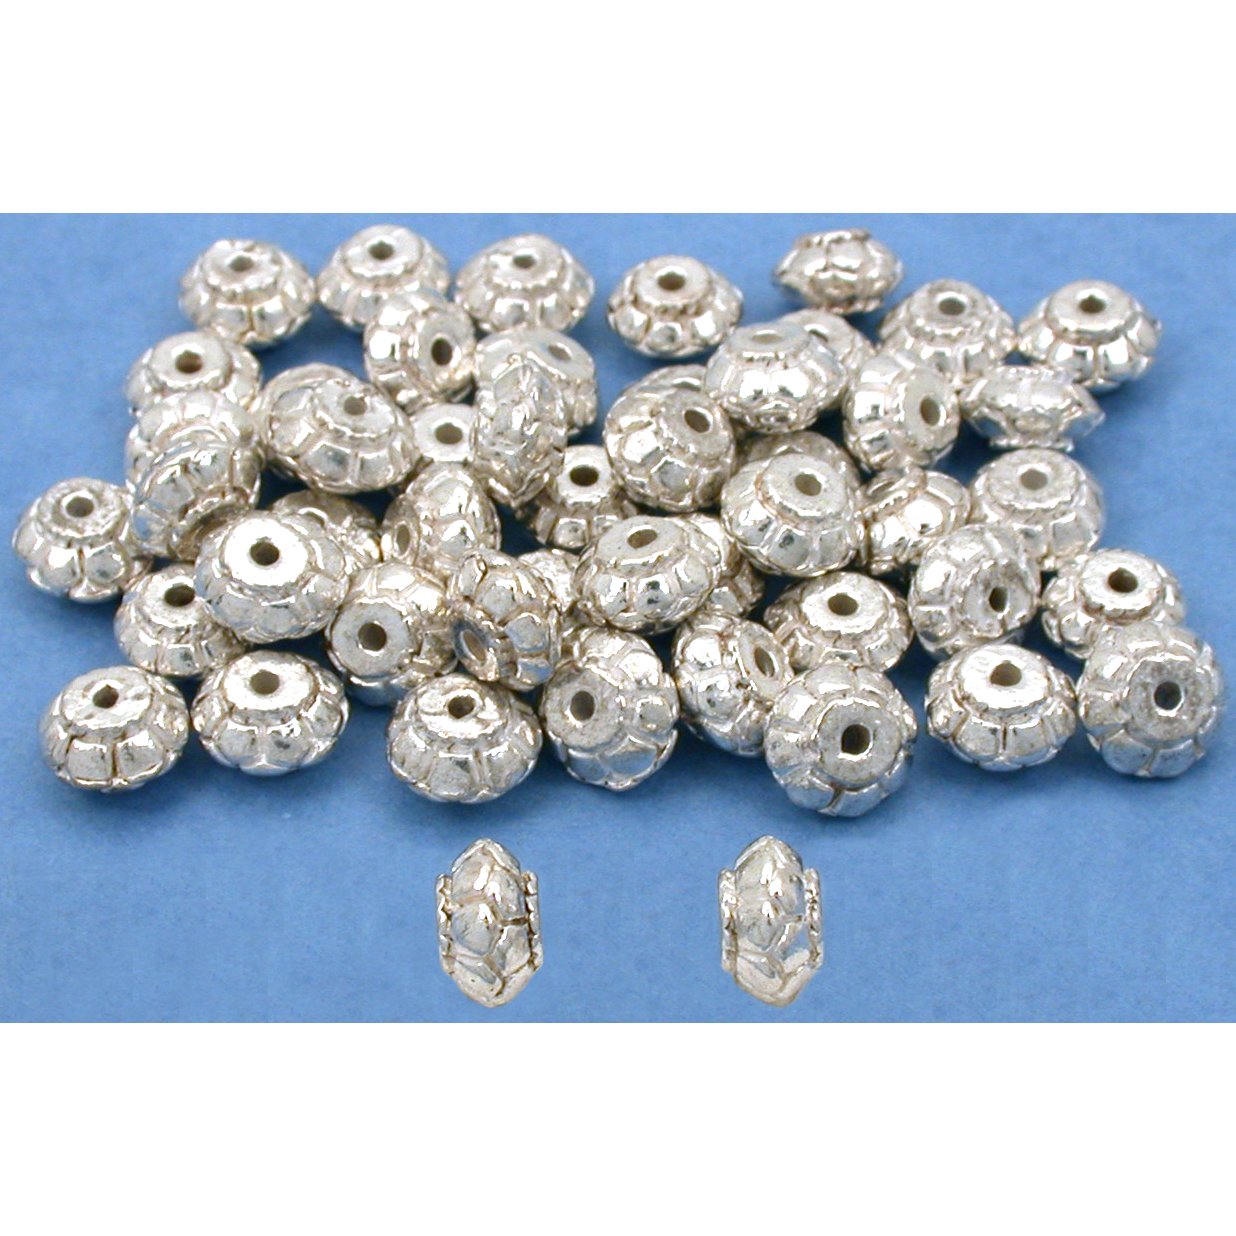 Bali Saucer Beads Silver Plated 7mm 50Pcs Approx.